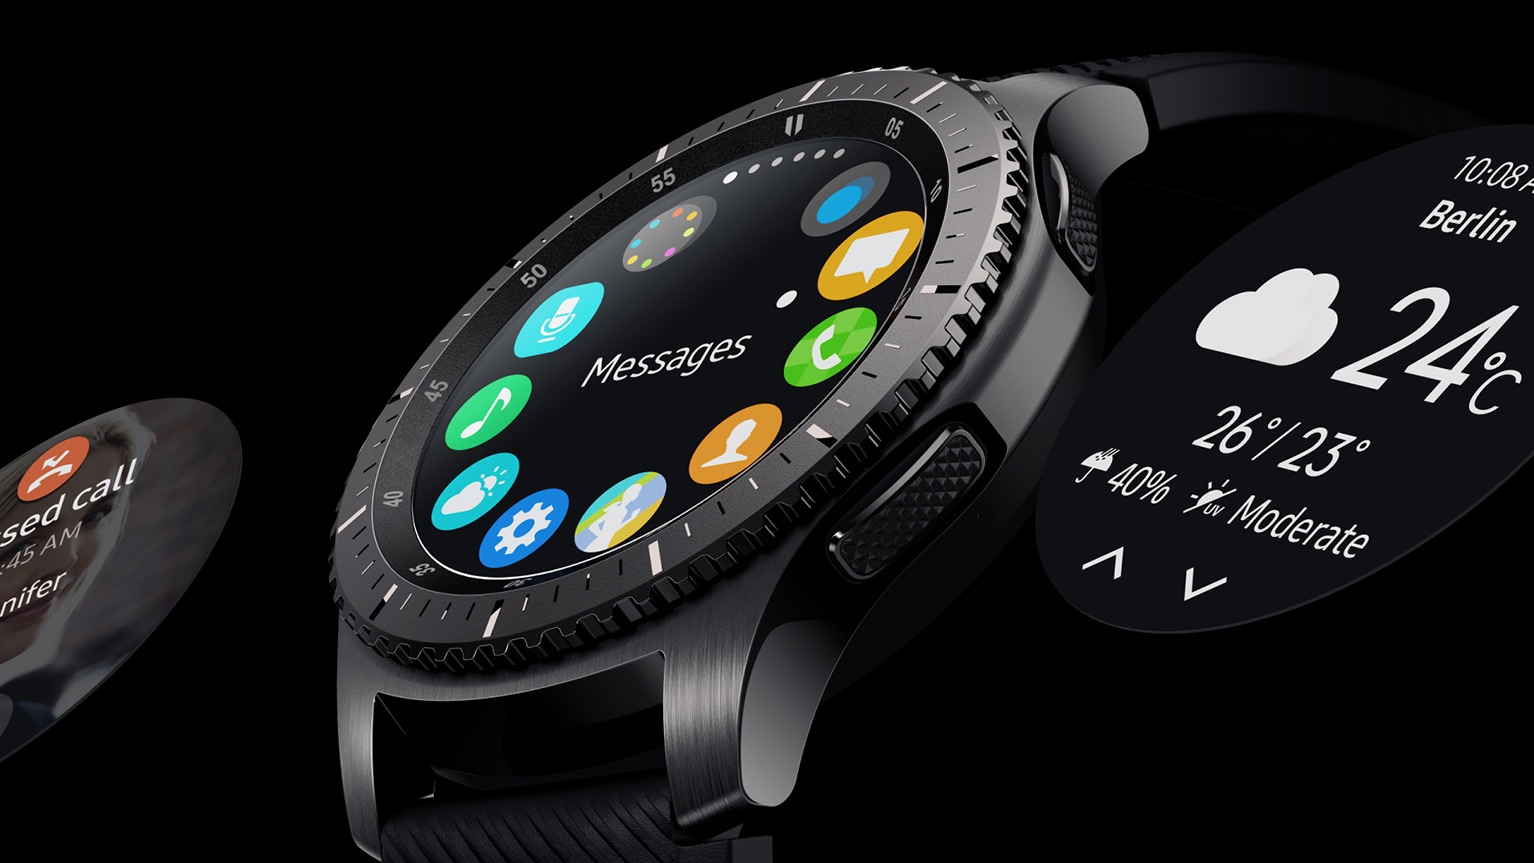 Fantastisch Tien Consulaat Experience The Gear S3 Smart Watch With Samsung Pay, Calls & GPS | Samsung  UK